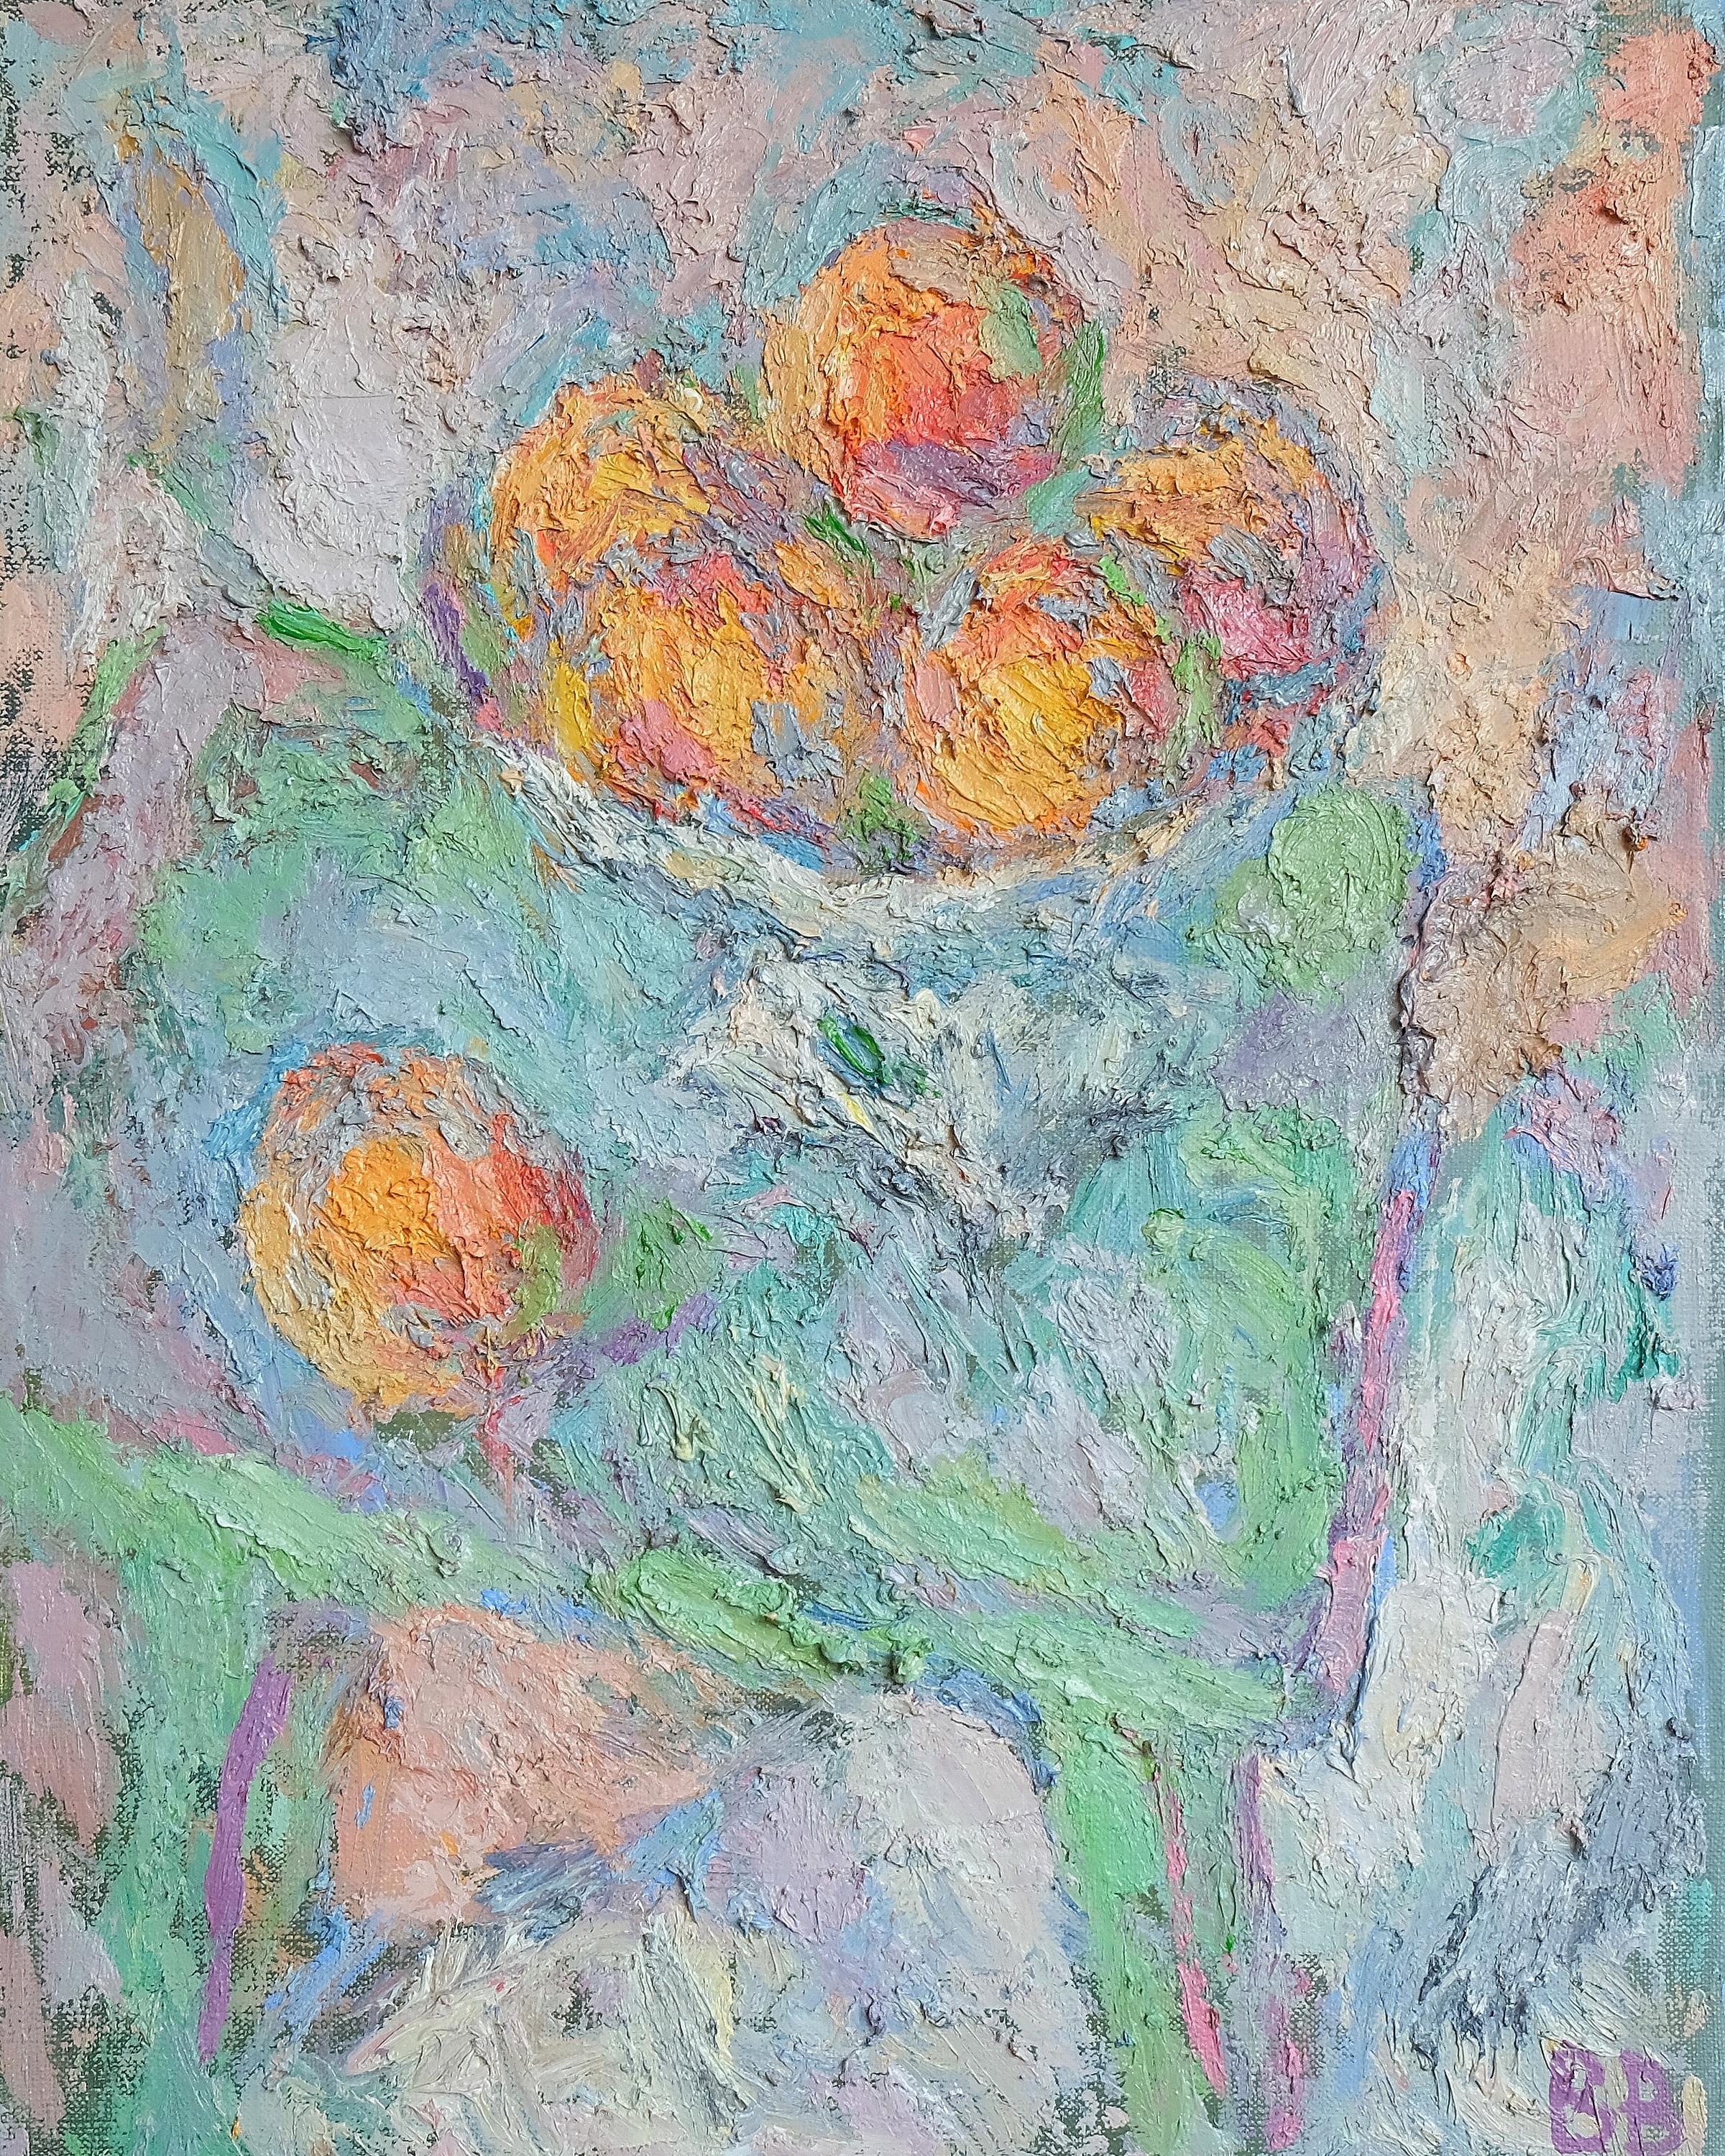 Peaches - 21st Century Contemporary Oil Painting - Impressionist Still Life